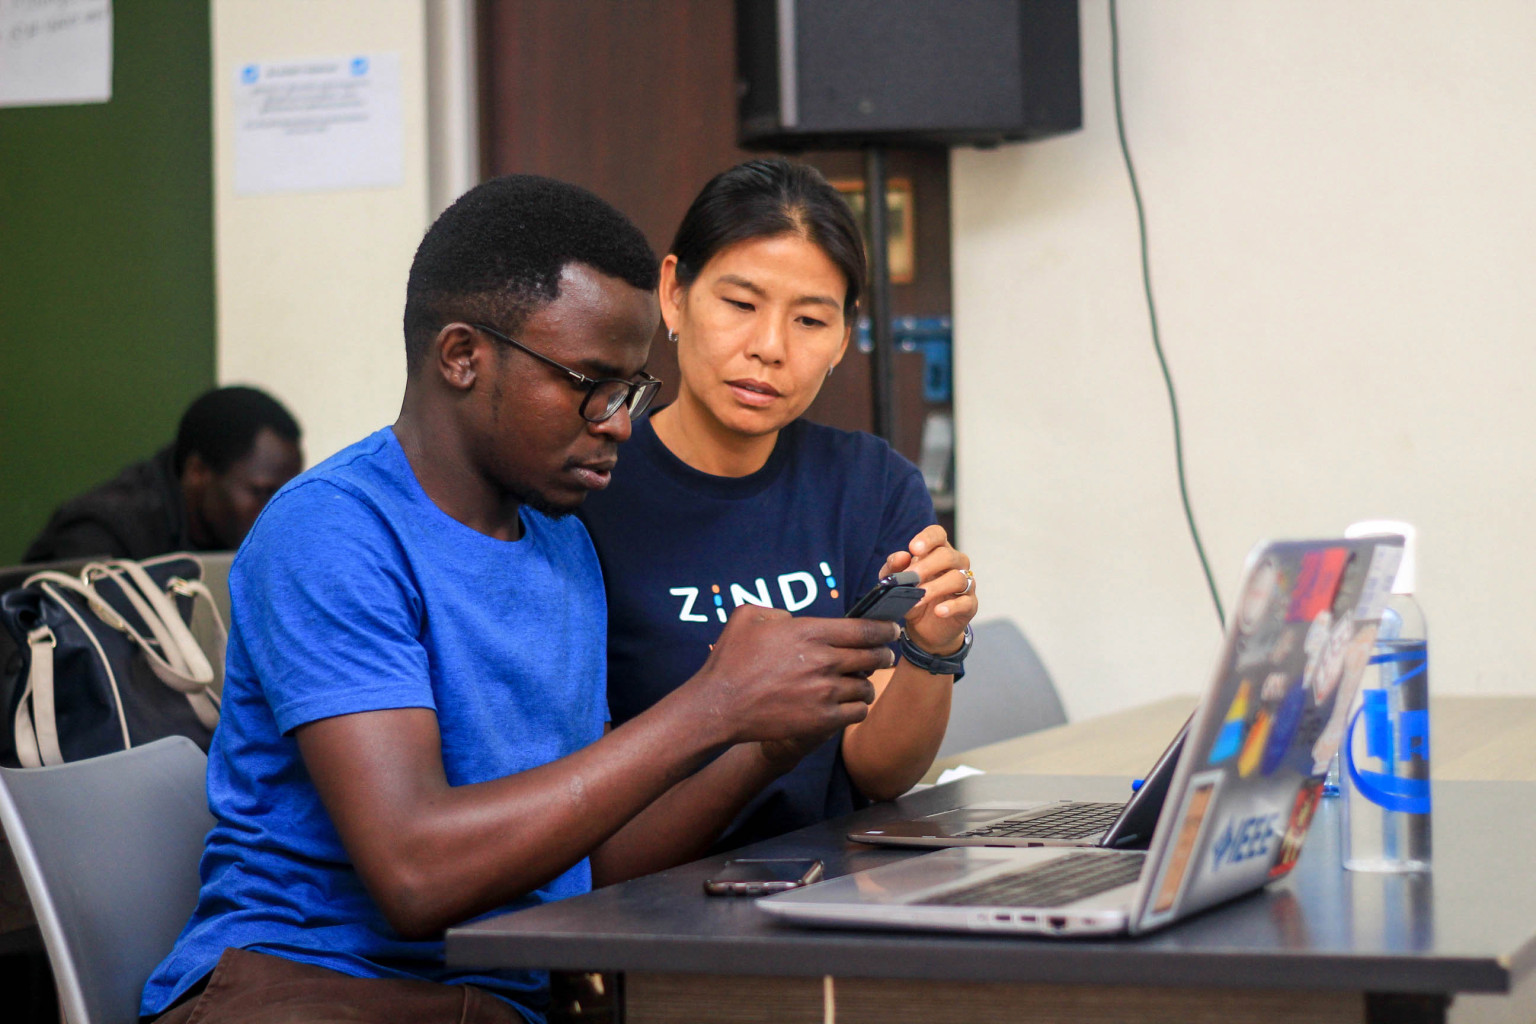 Zindi: African startup registers 10,000 data scientists to solve complex problems in the continent